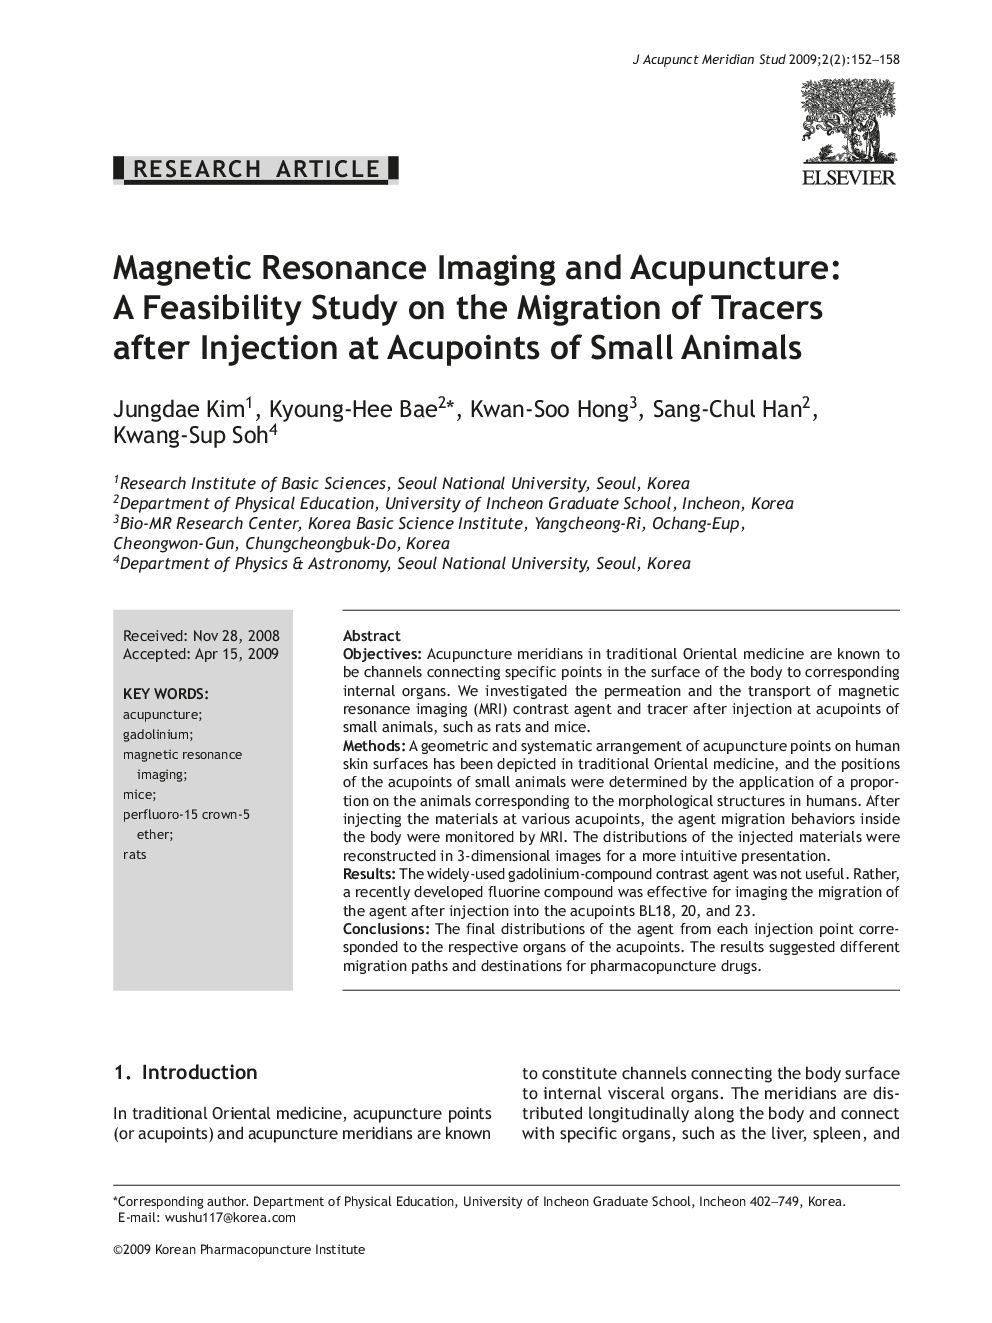 Magnetic Resonance Imaging and Acupuncture: A Feasibility Study on the Migration of Tracers after Injection at Acupoints of Small Animals